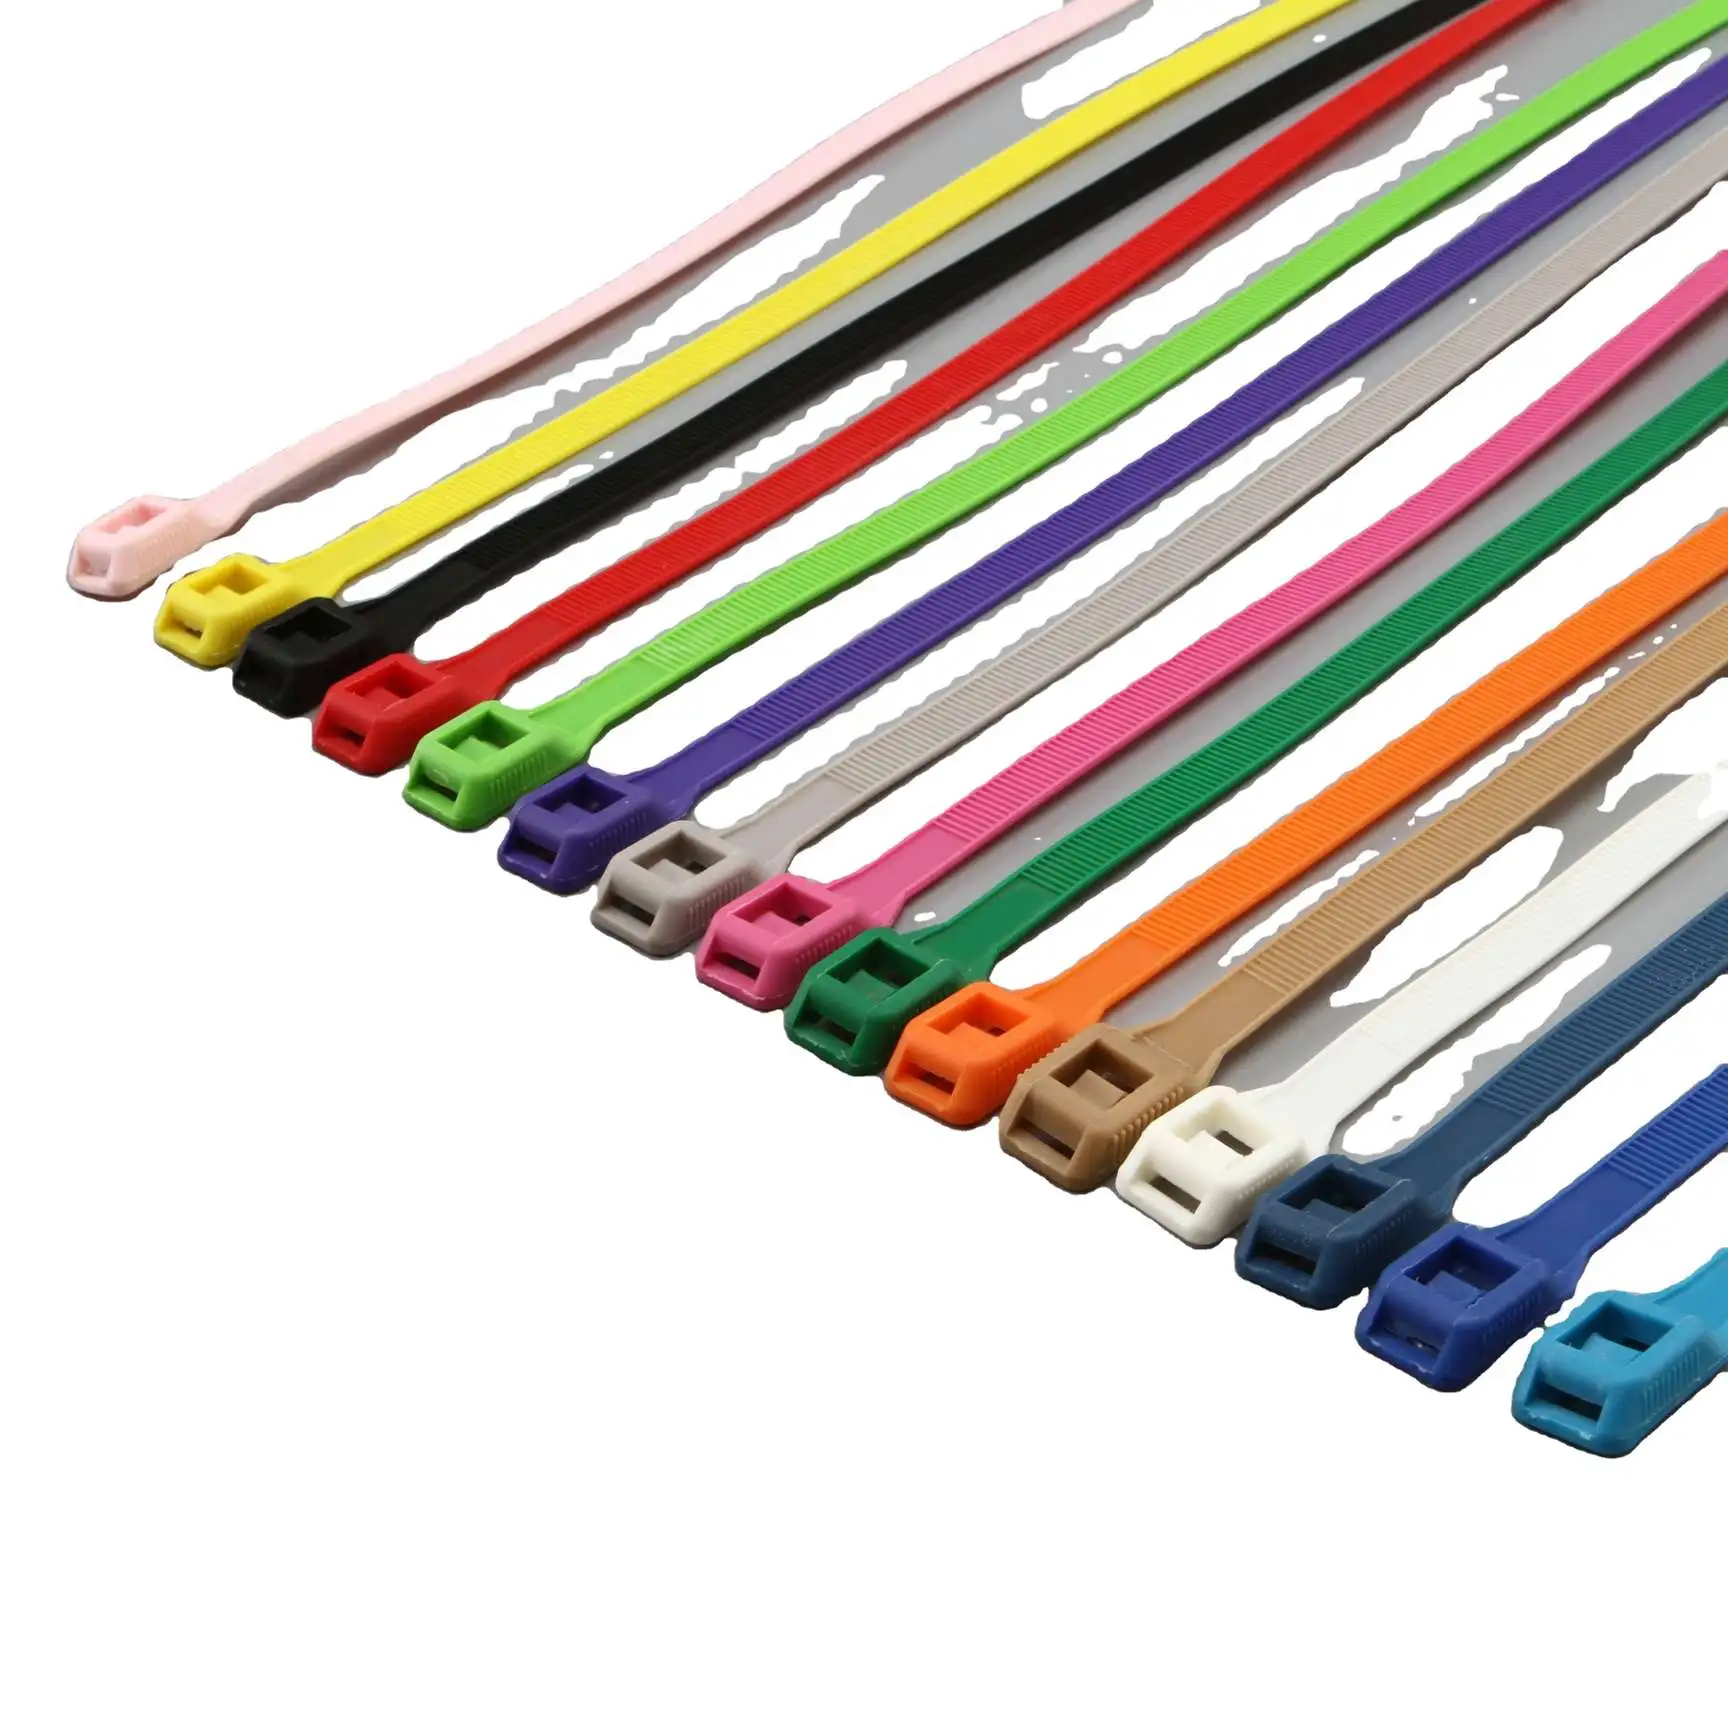 Weatherability cable tie